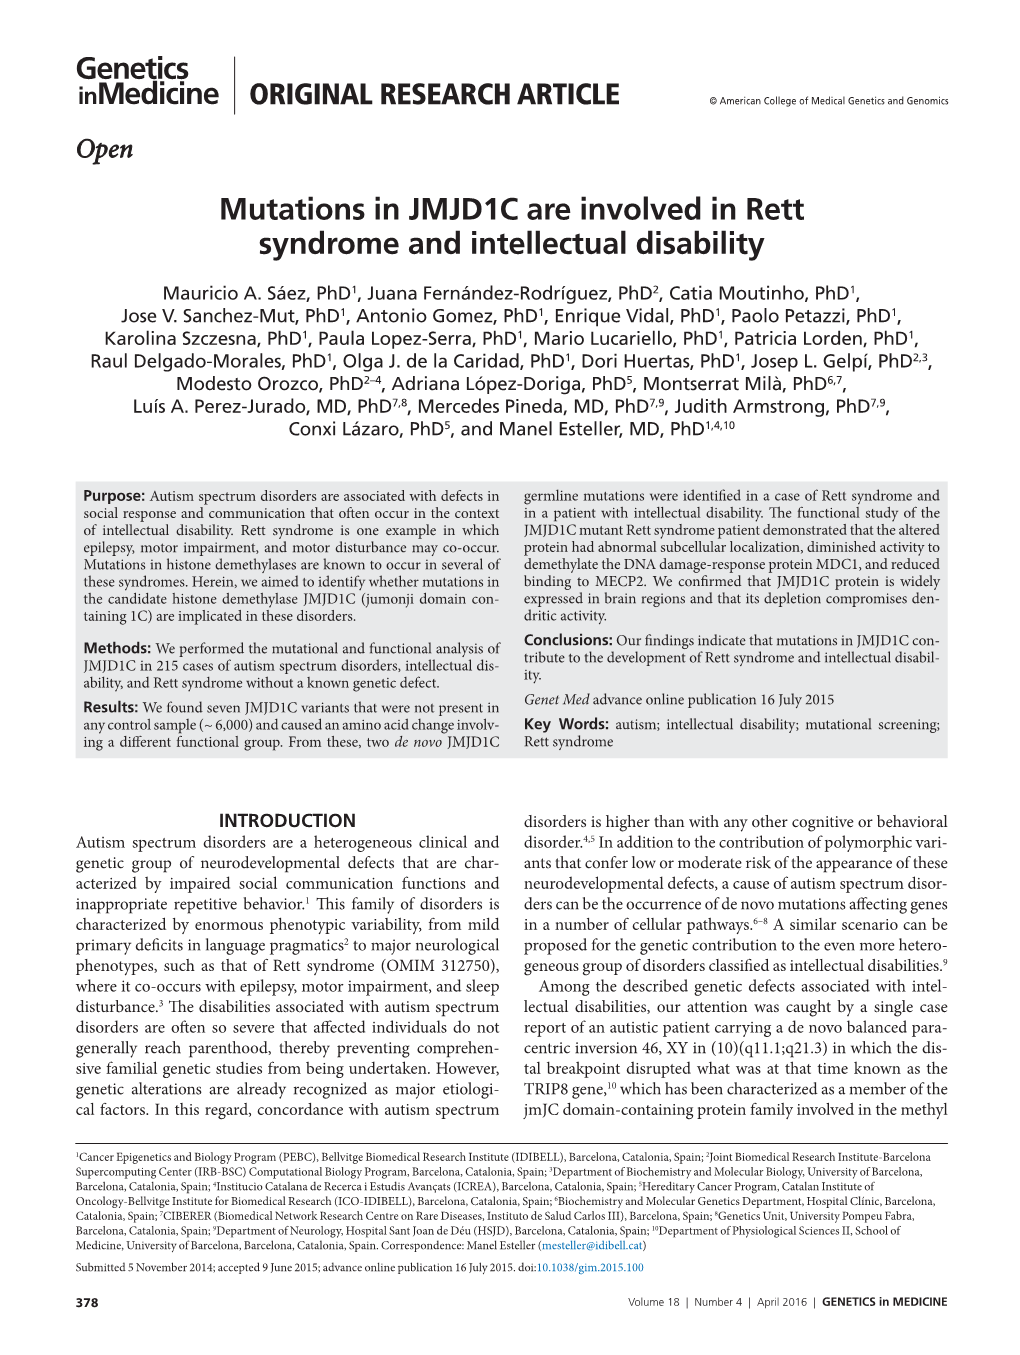 Mutations in JMJD1C Are Involved in Rett Syndrome and Intellectual Disability